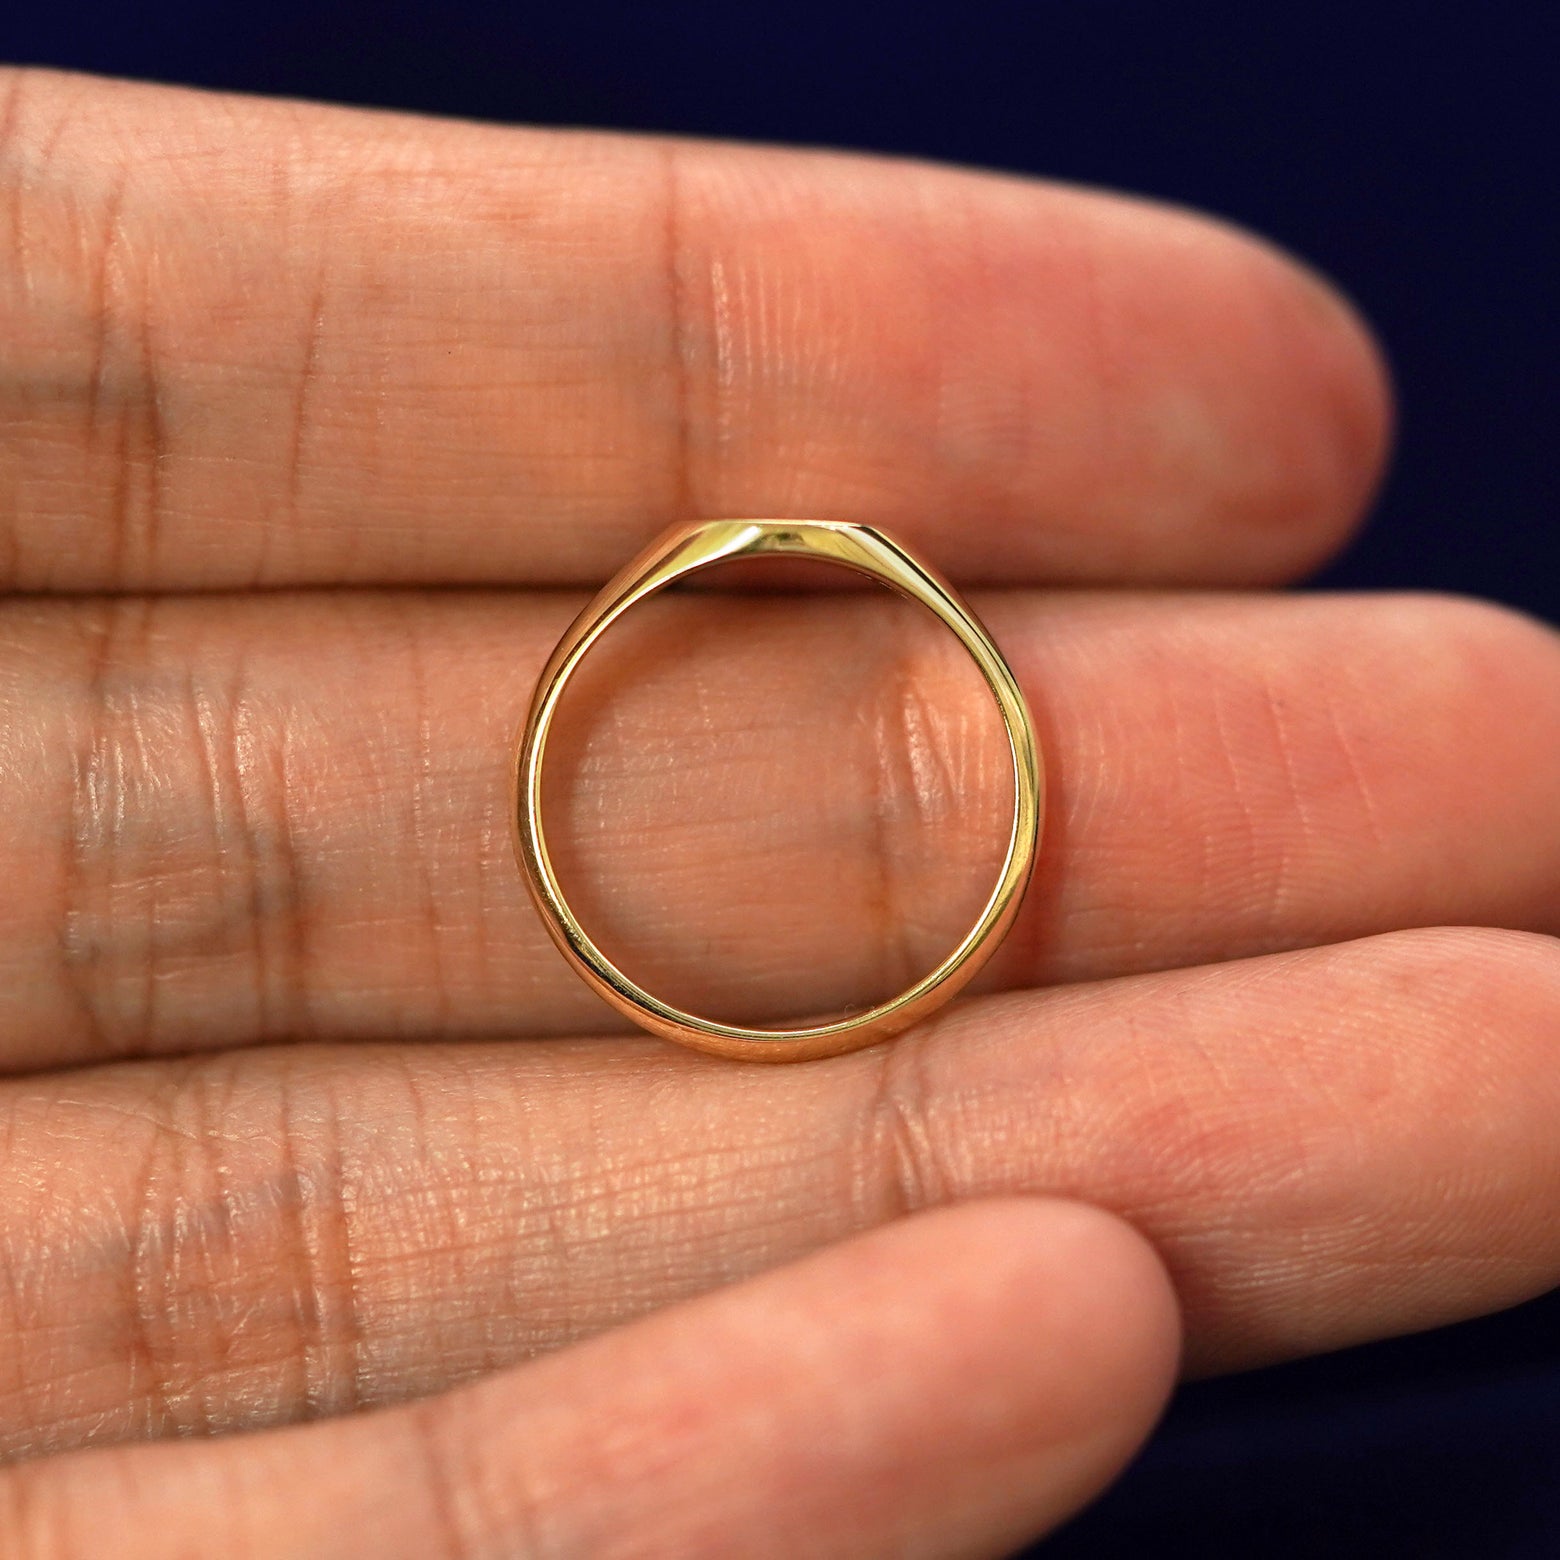 A yellow gold Diamond Signet Ring in a model's hand showing the thickness of the band